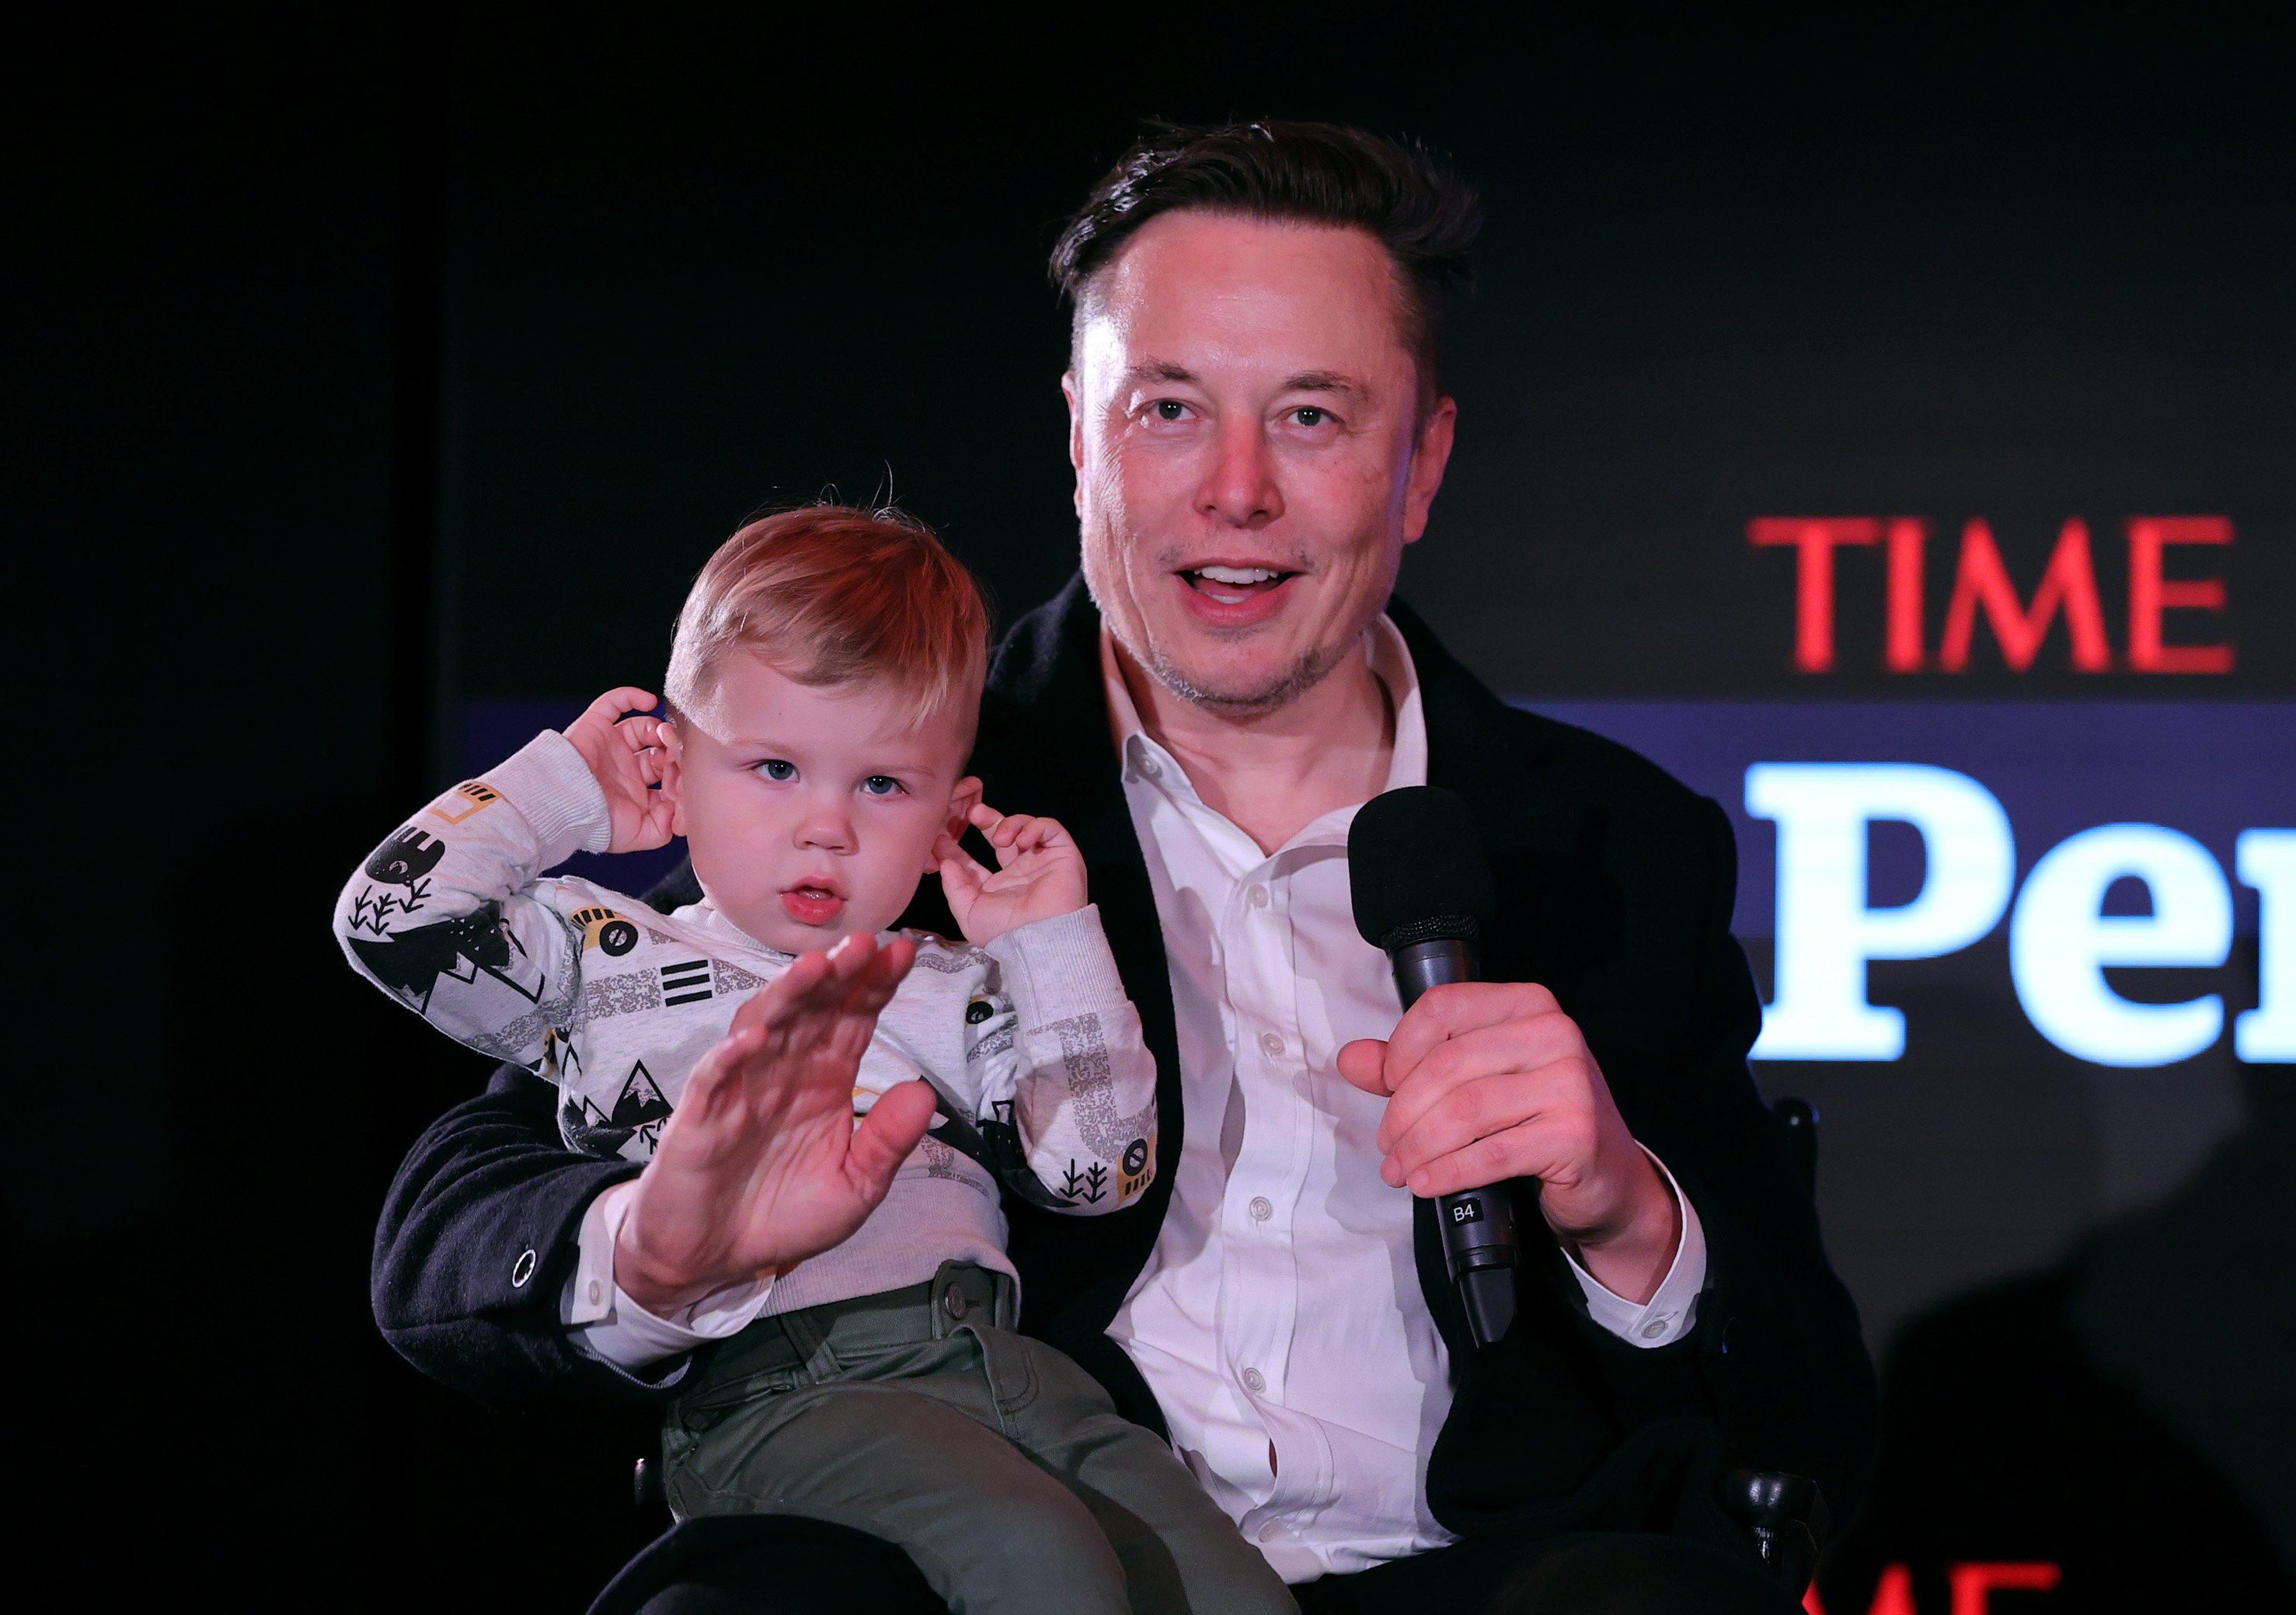 Elon Musk and son X Æ A-12 on stage TIME Person of the Year on December 13, 2021 in New York City. | Source: Getty Images